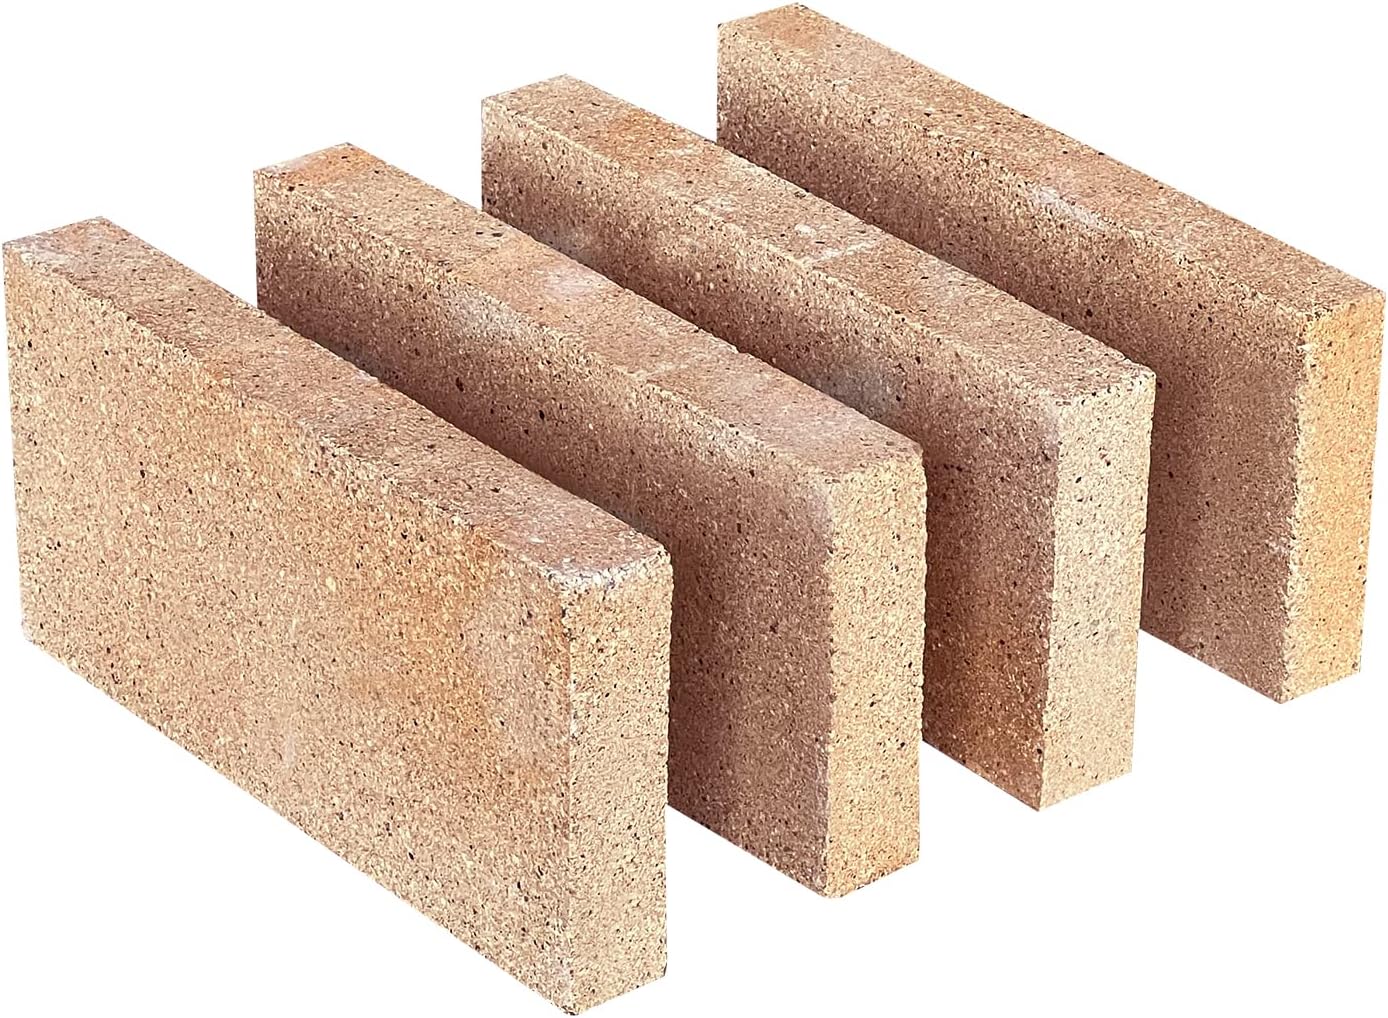 Us Stove FBP6 Replacement Fire Brick - 6 pack